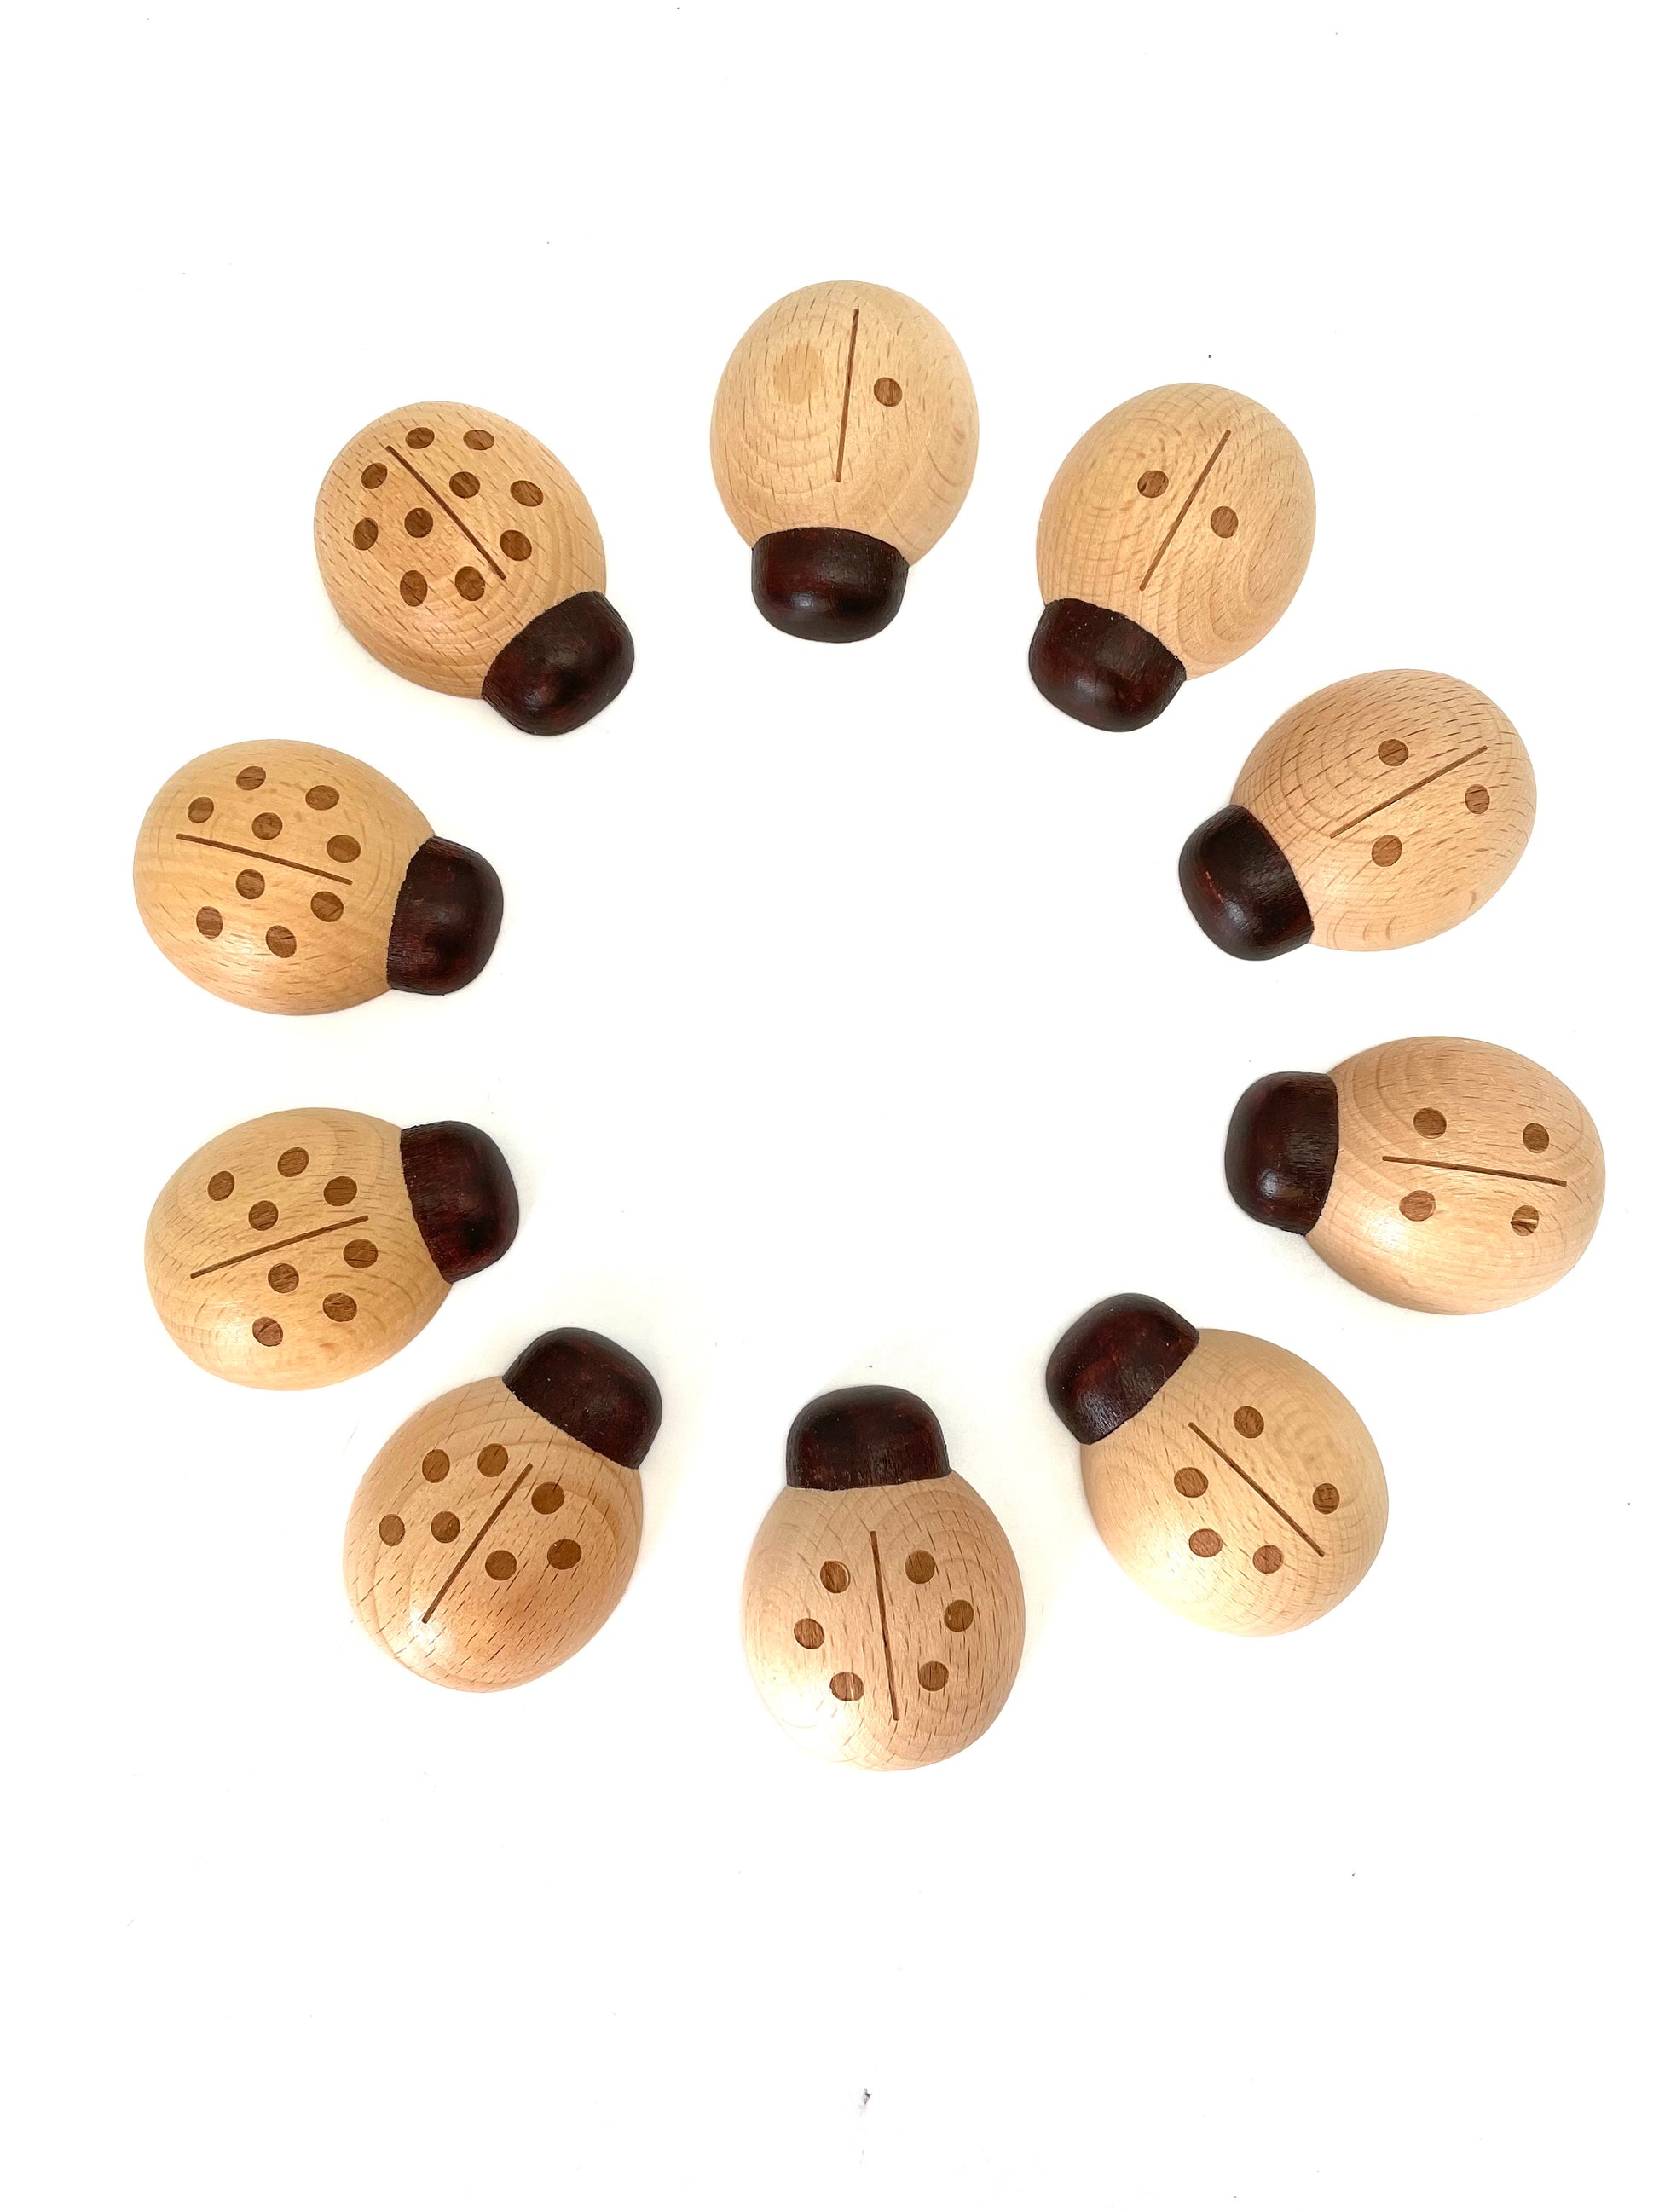 Super Cute!!! Natural Wooden Counting Numbers Ladybug Toys Number Learning Toy! - HAPPY GUMNUT